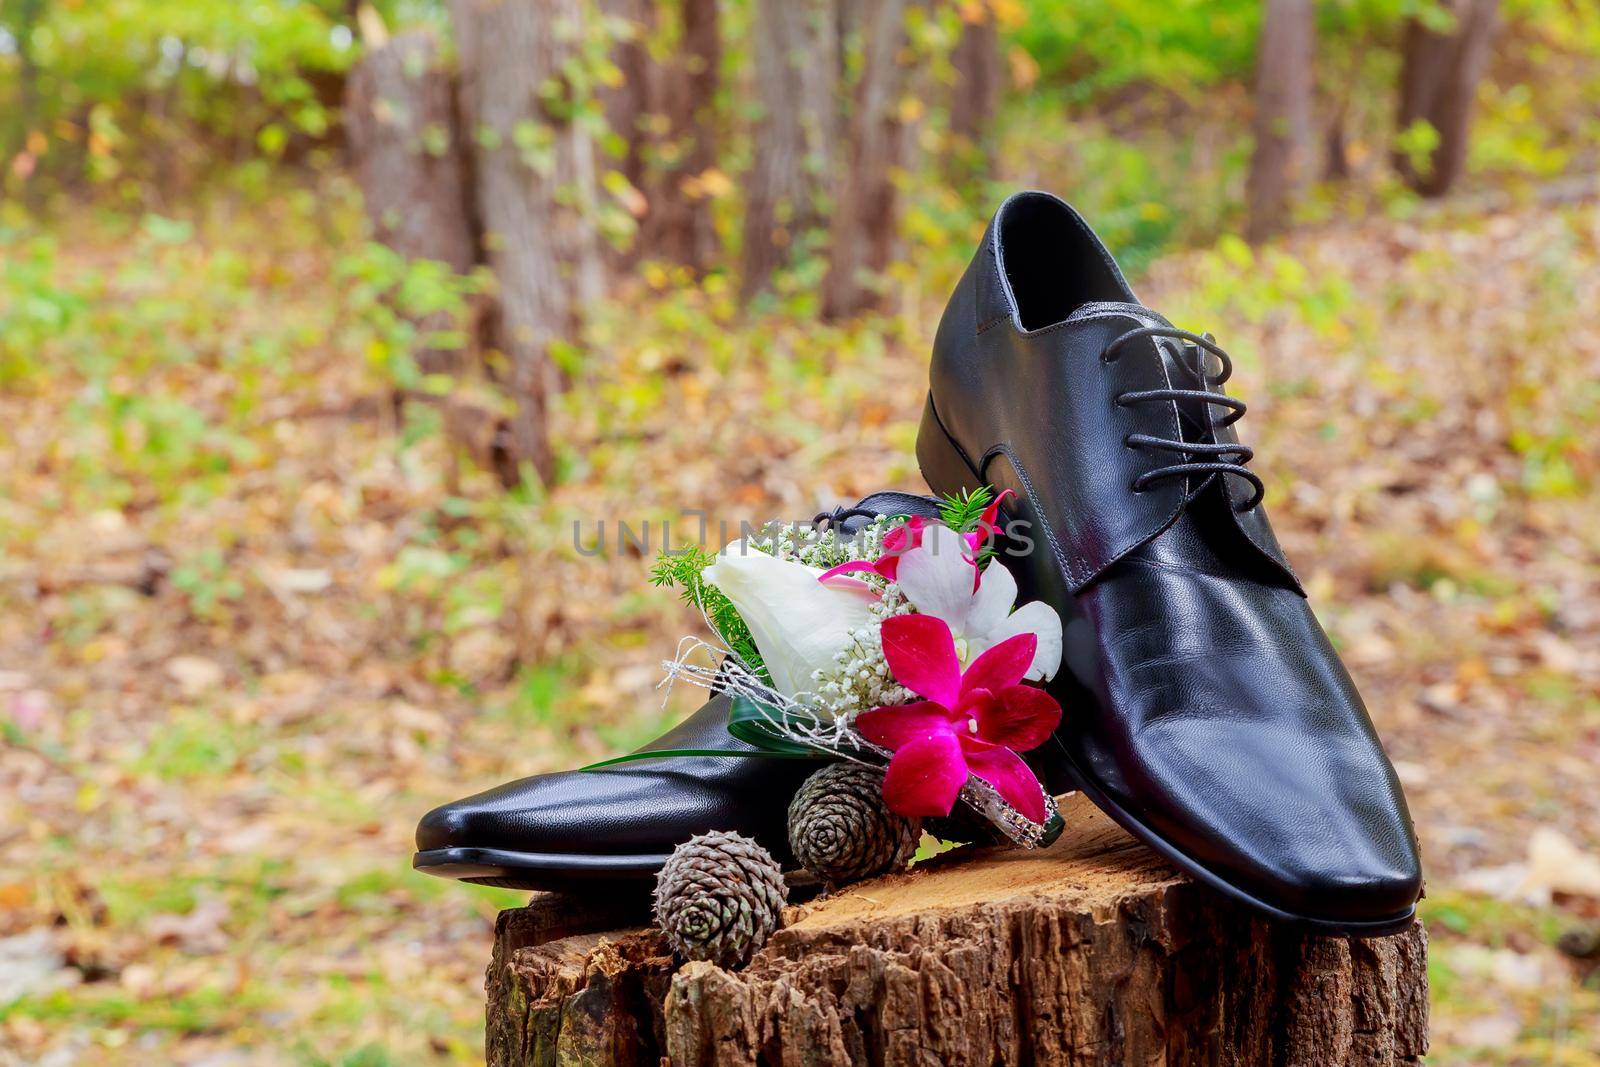 Wedding details. Groom accessories. Shoes, rings belt and bowtie